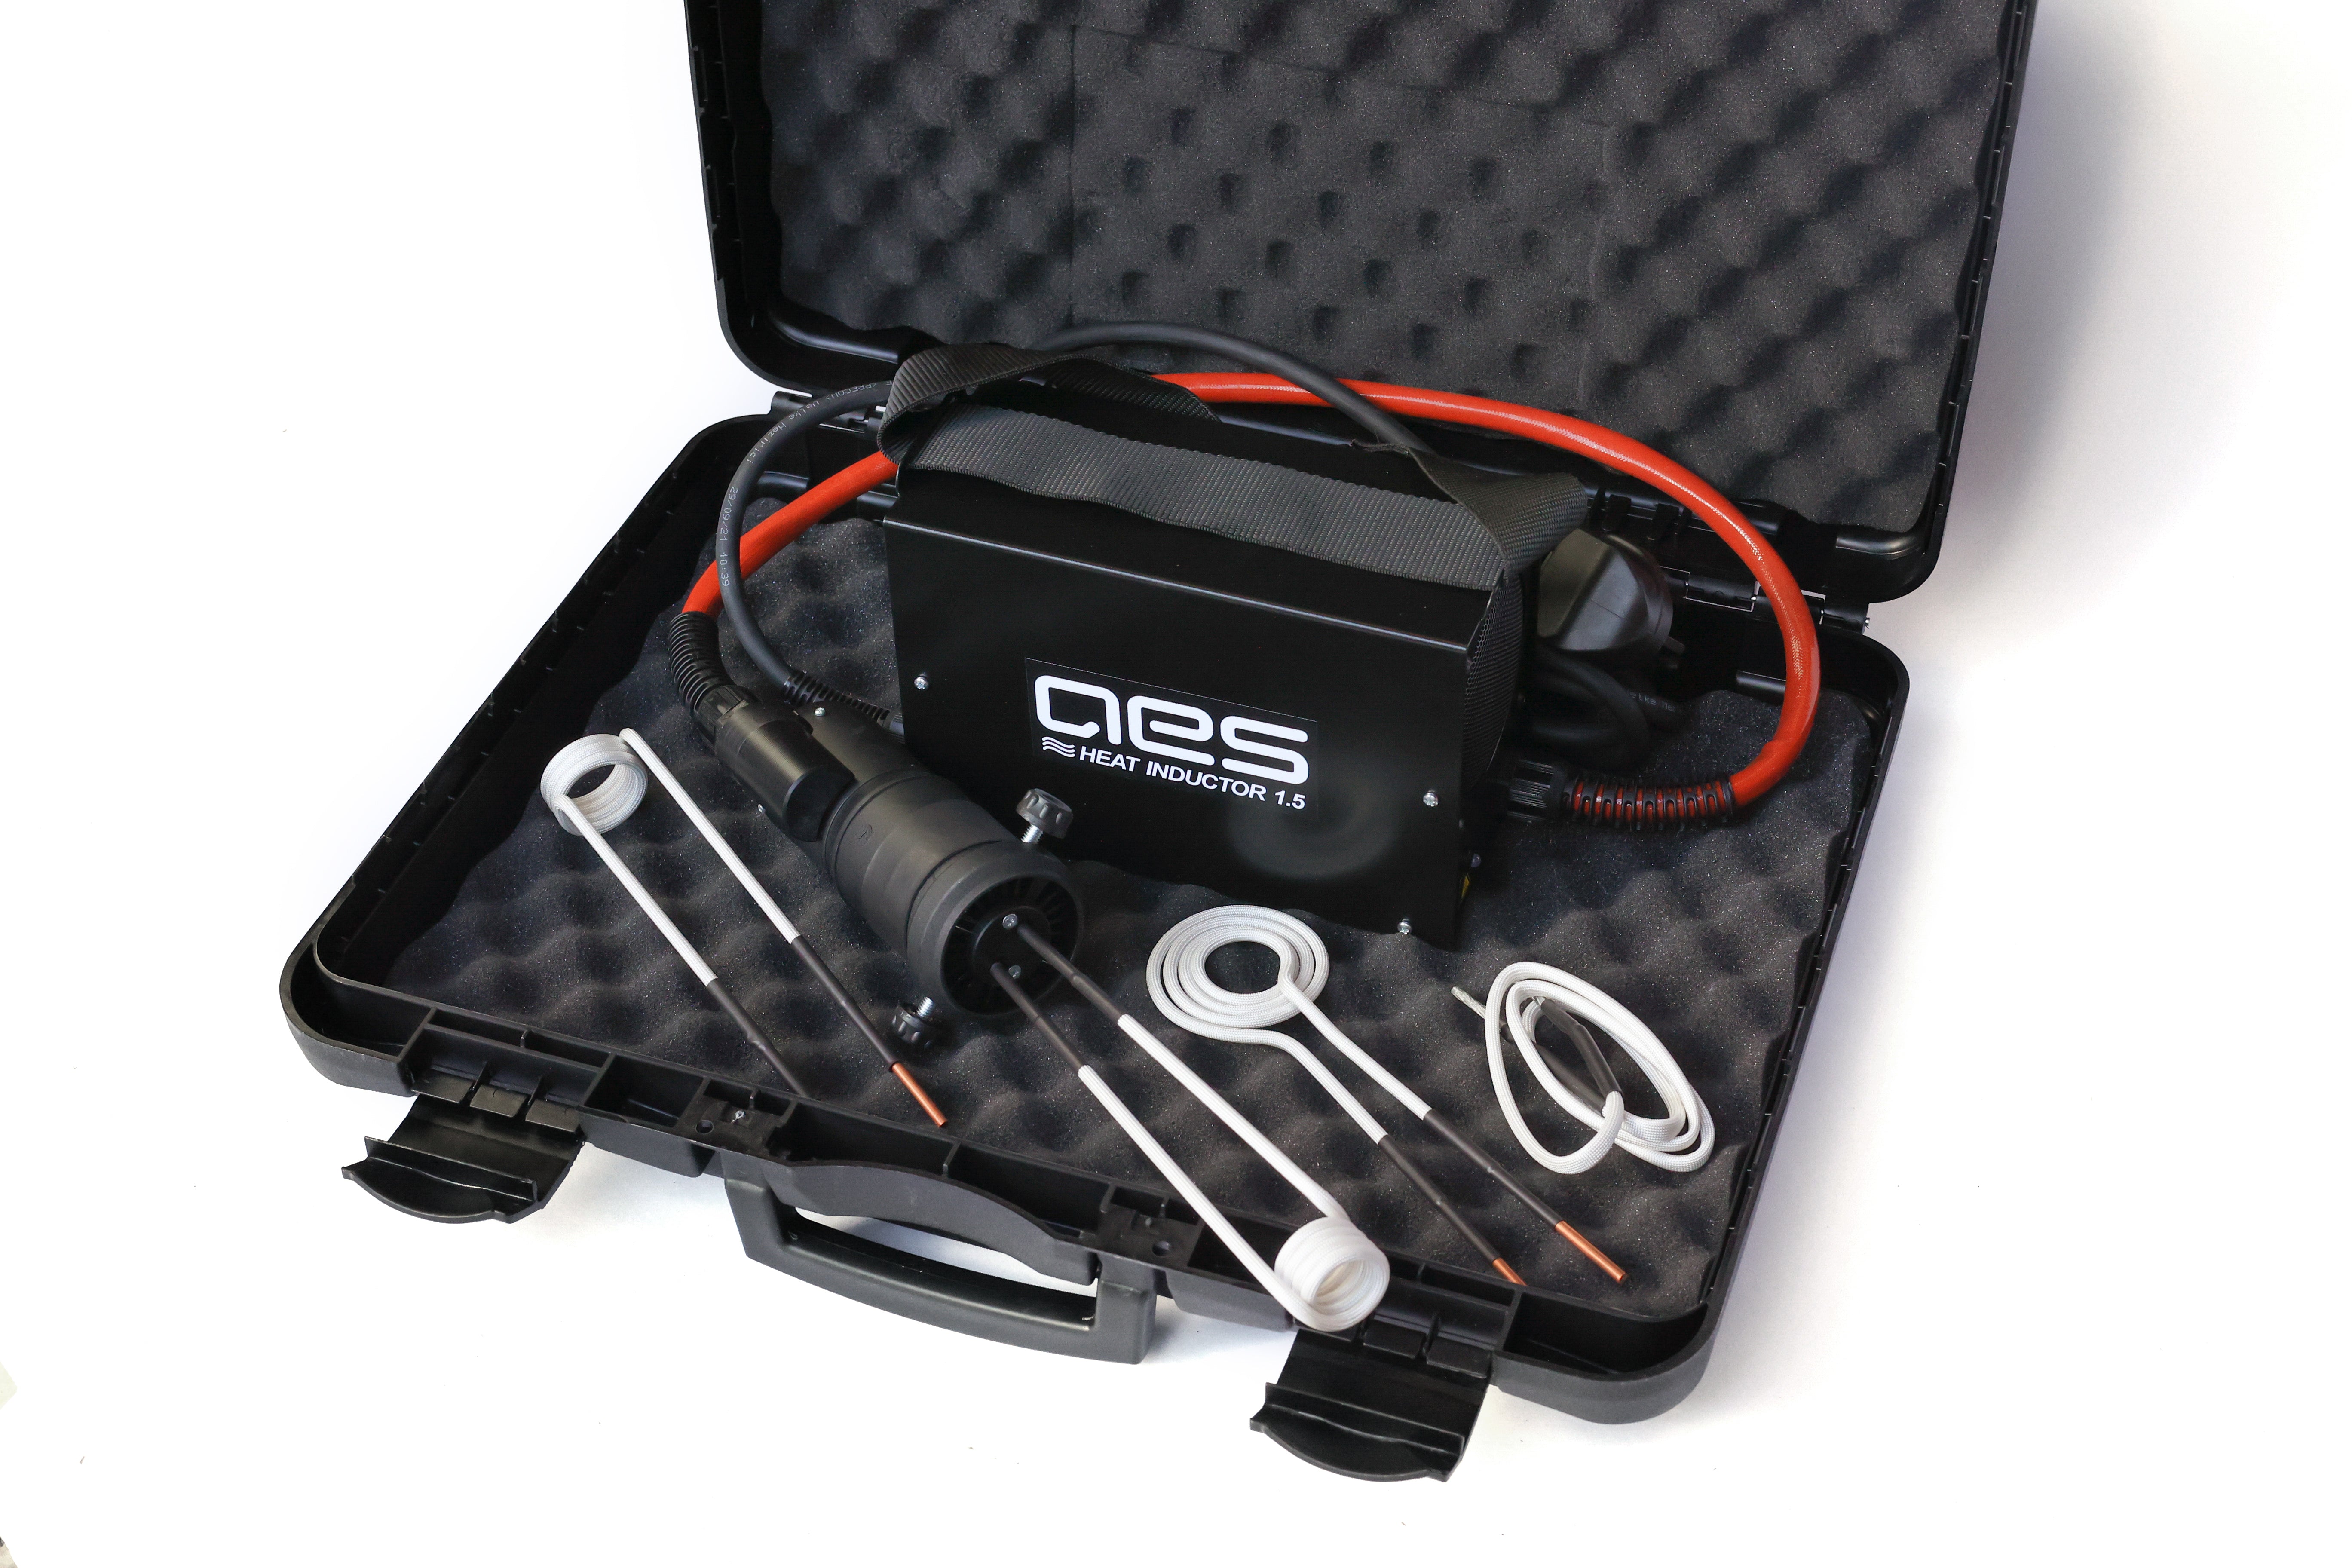 AES HI 1.5kw Portable Induction Heating Tool Kit